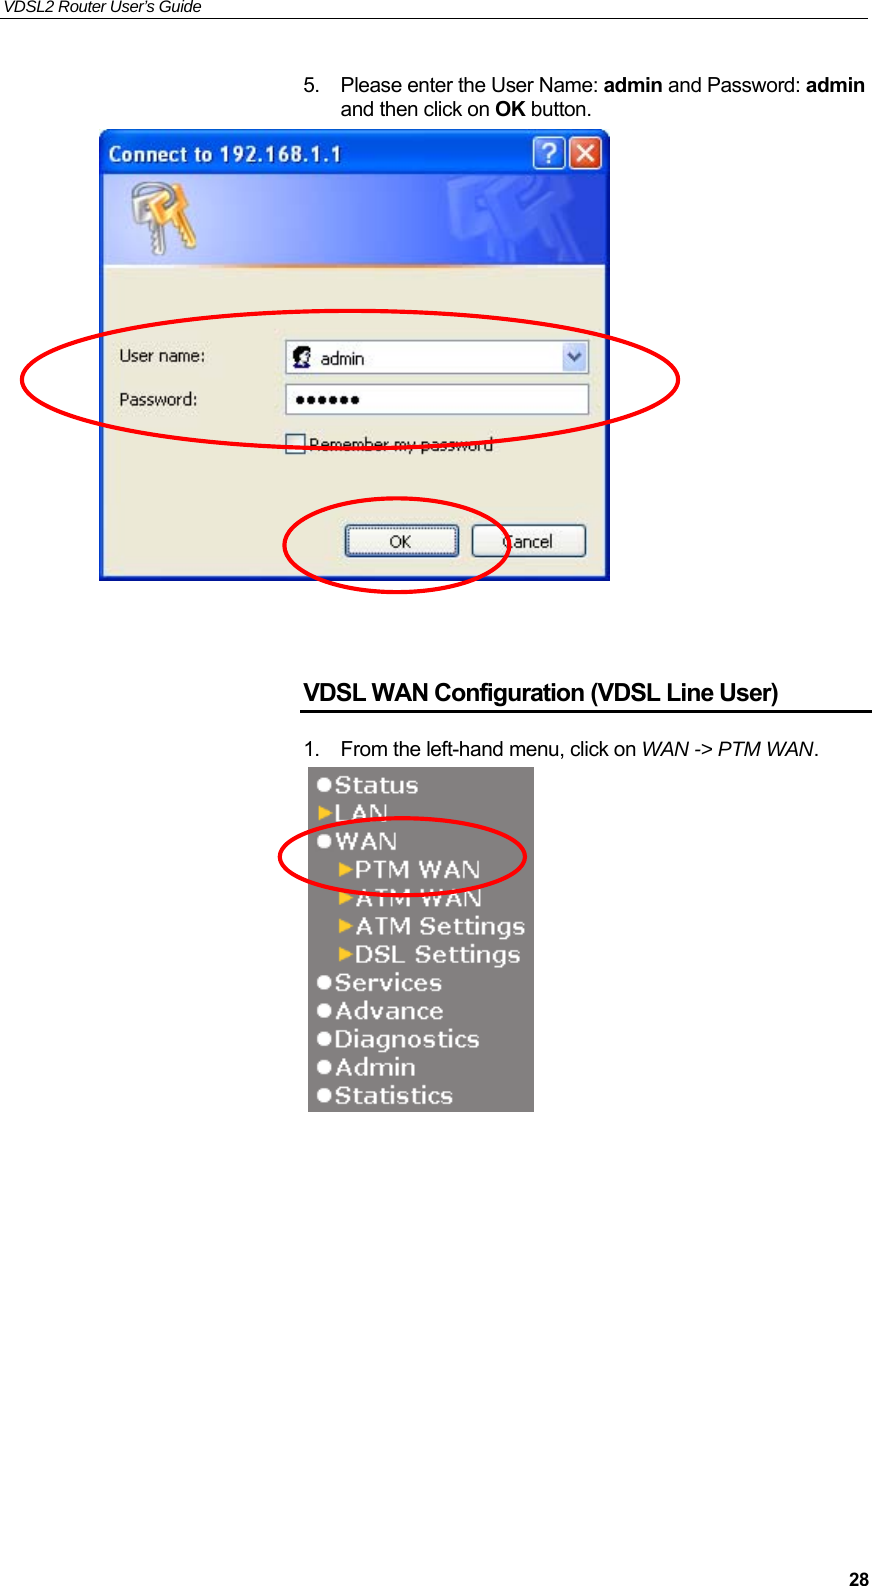 VDSL2 Router User’s Guide     285.  Please enter the User Name: admin and Password: admin and then click on OK button.     VDSL WAN Configuration (VDSL Line User) 1.  From the left-hand menu, click on WAN -&gt; PTM WAN.                